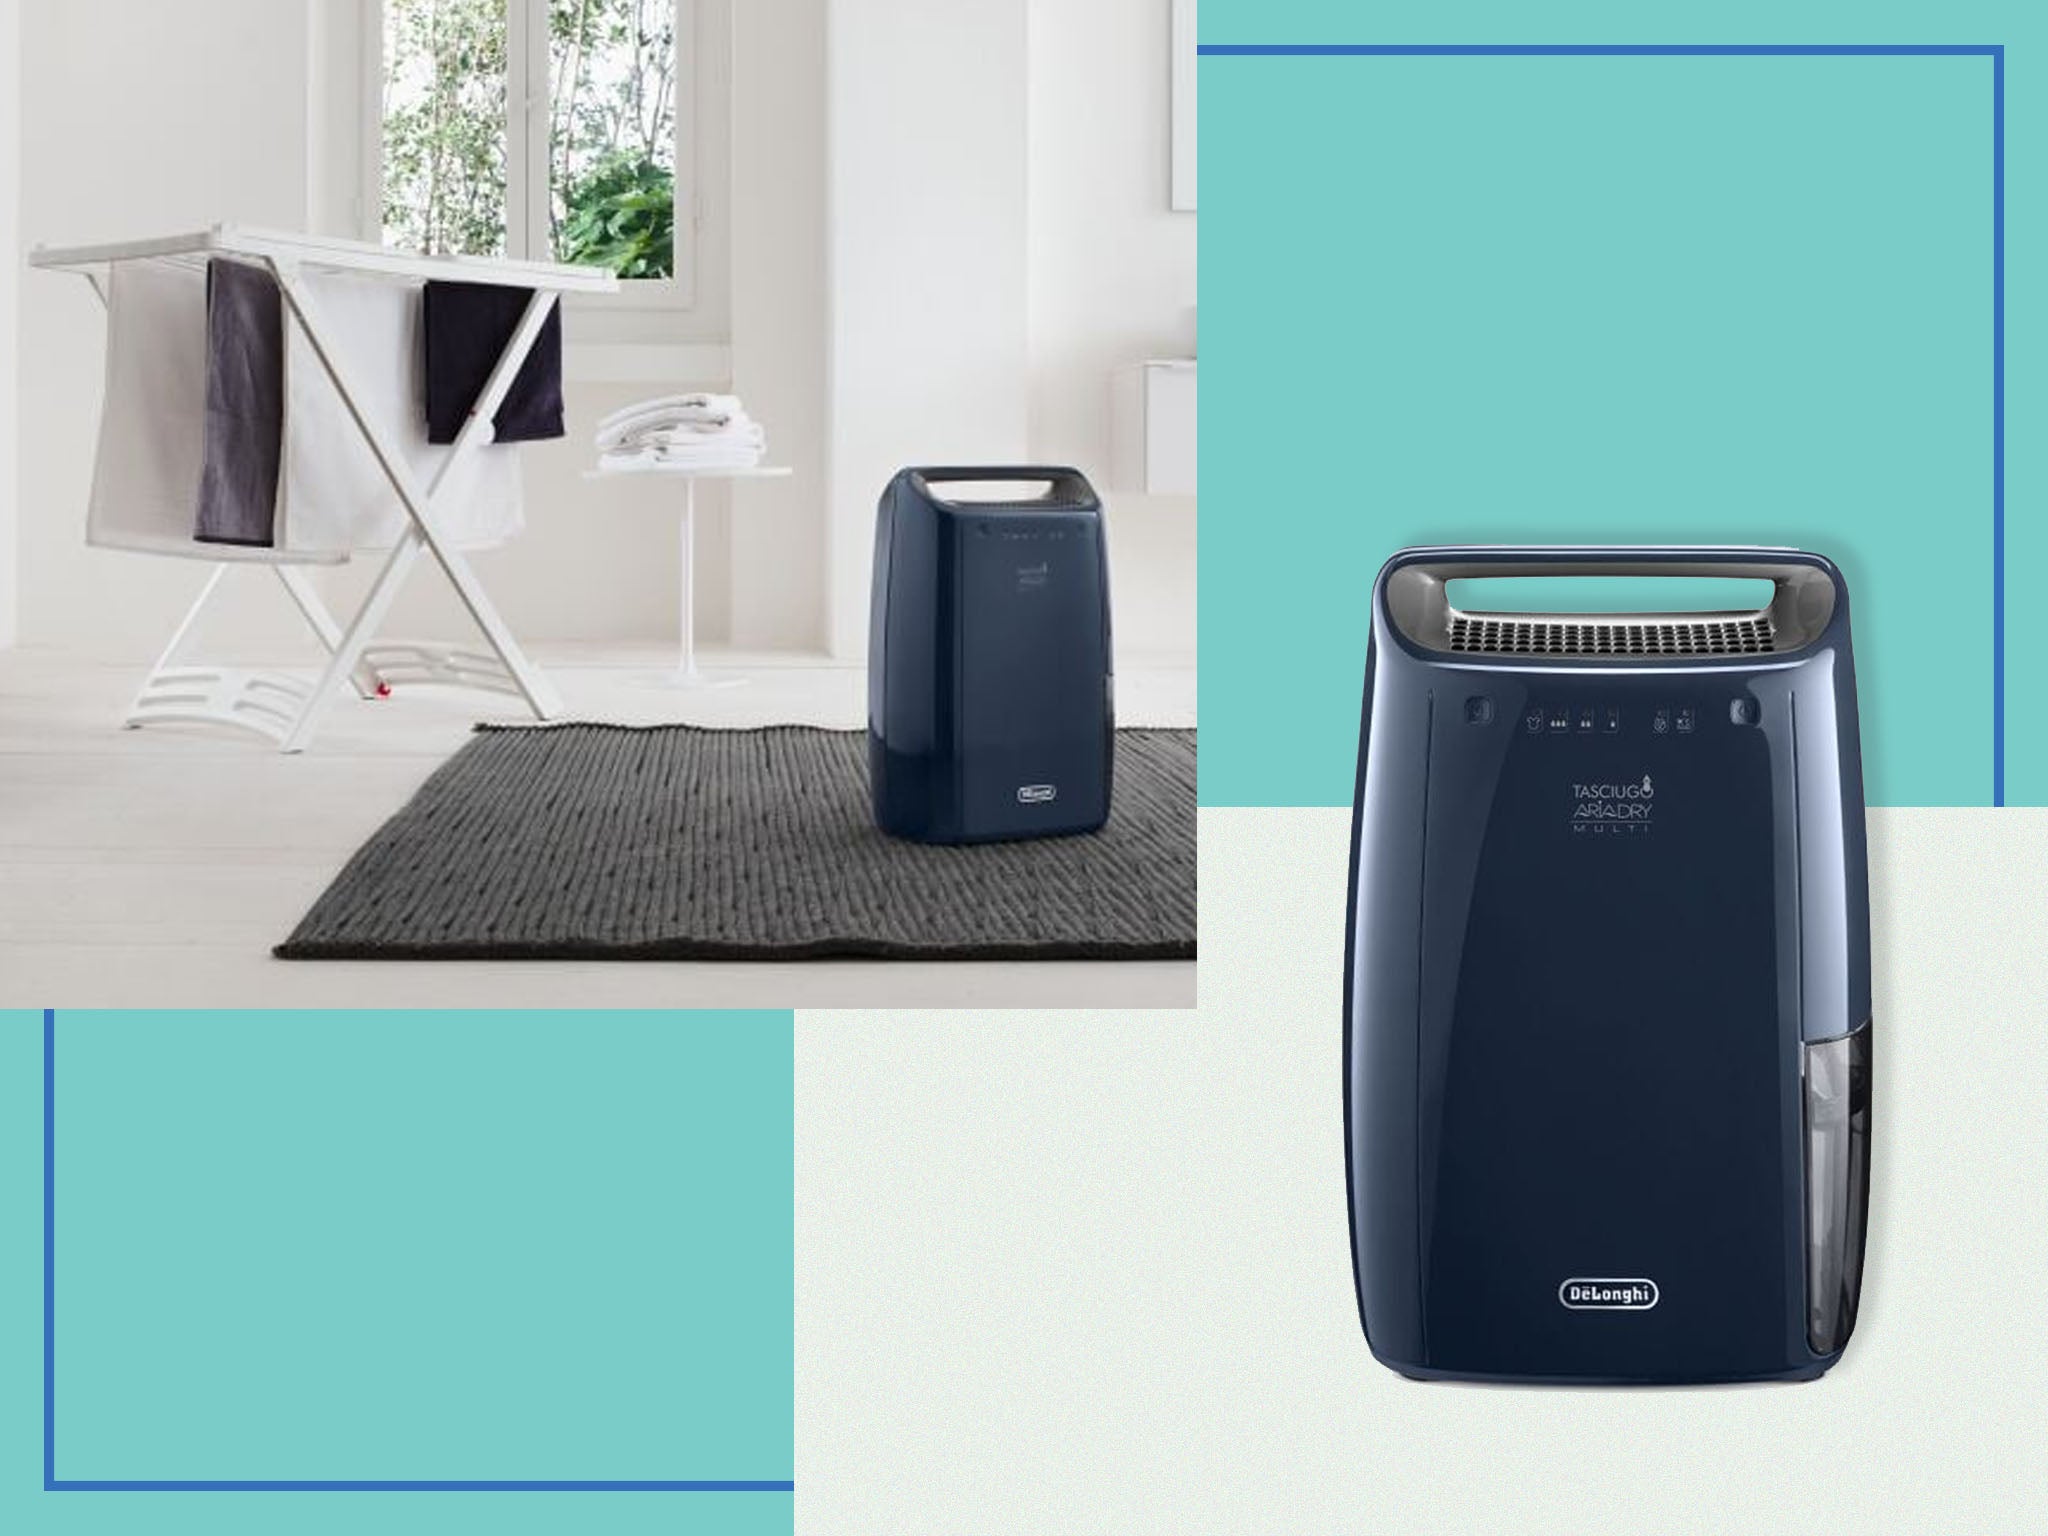 Depending on their wattage, dehumidifiers cost between 10p and 30p an hour to run